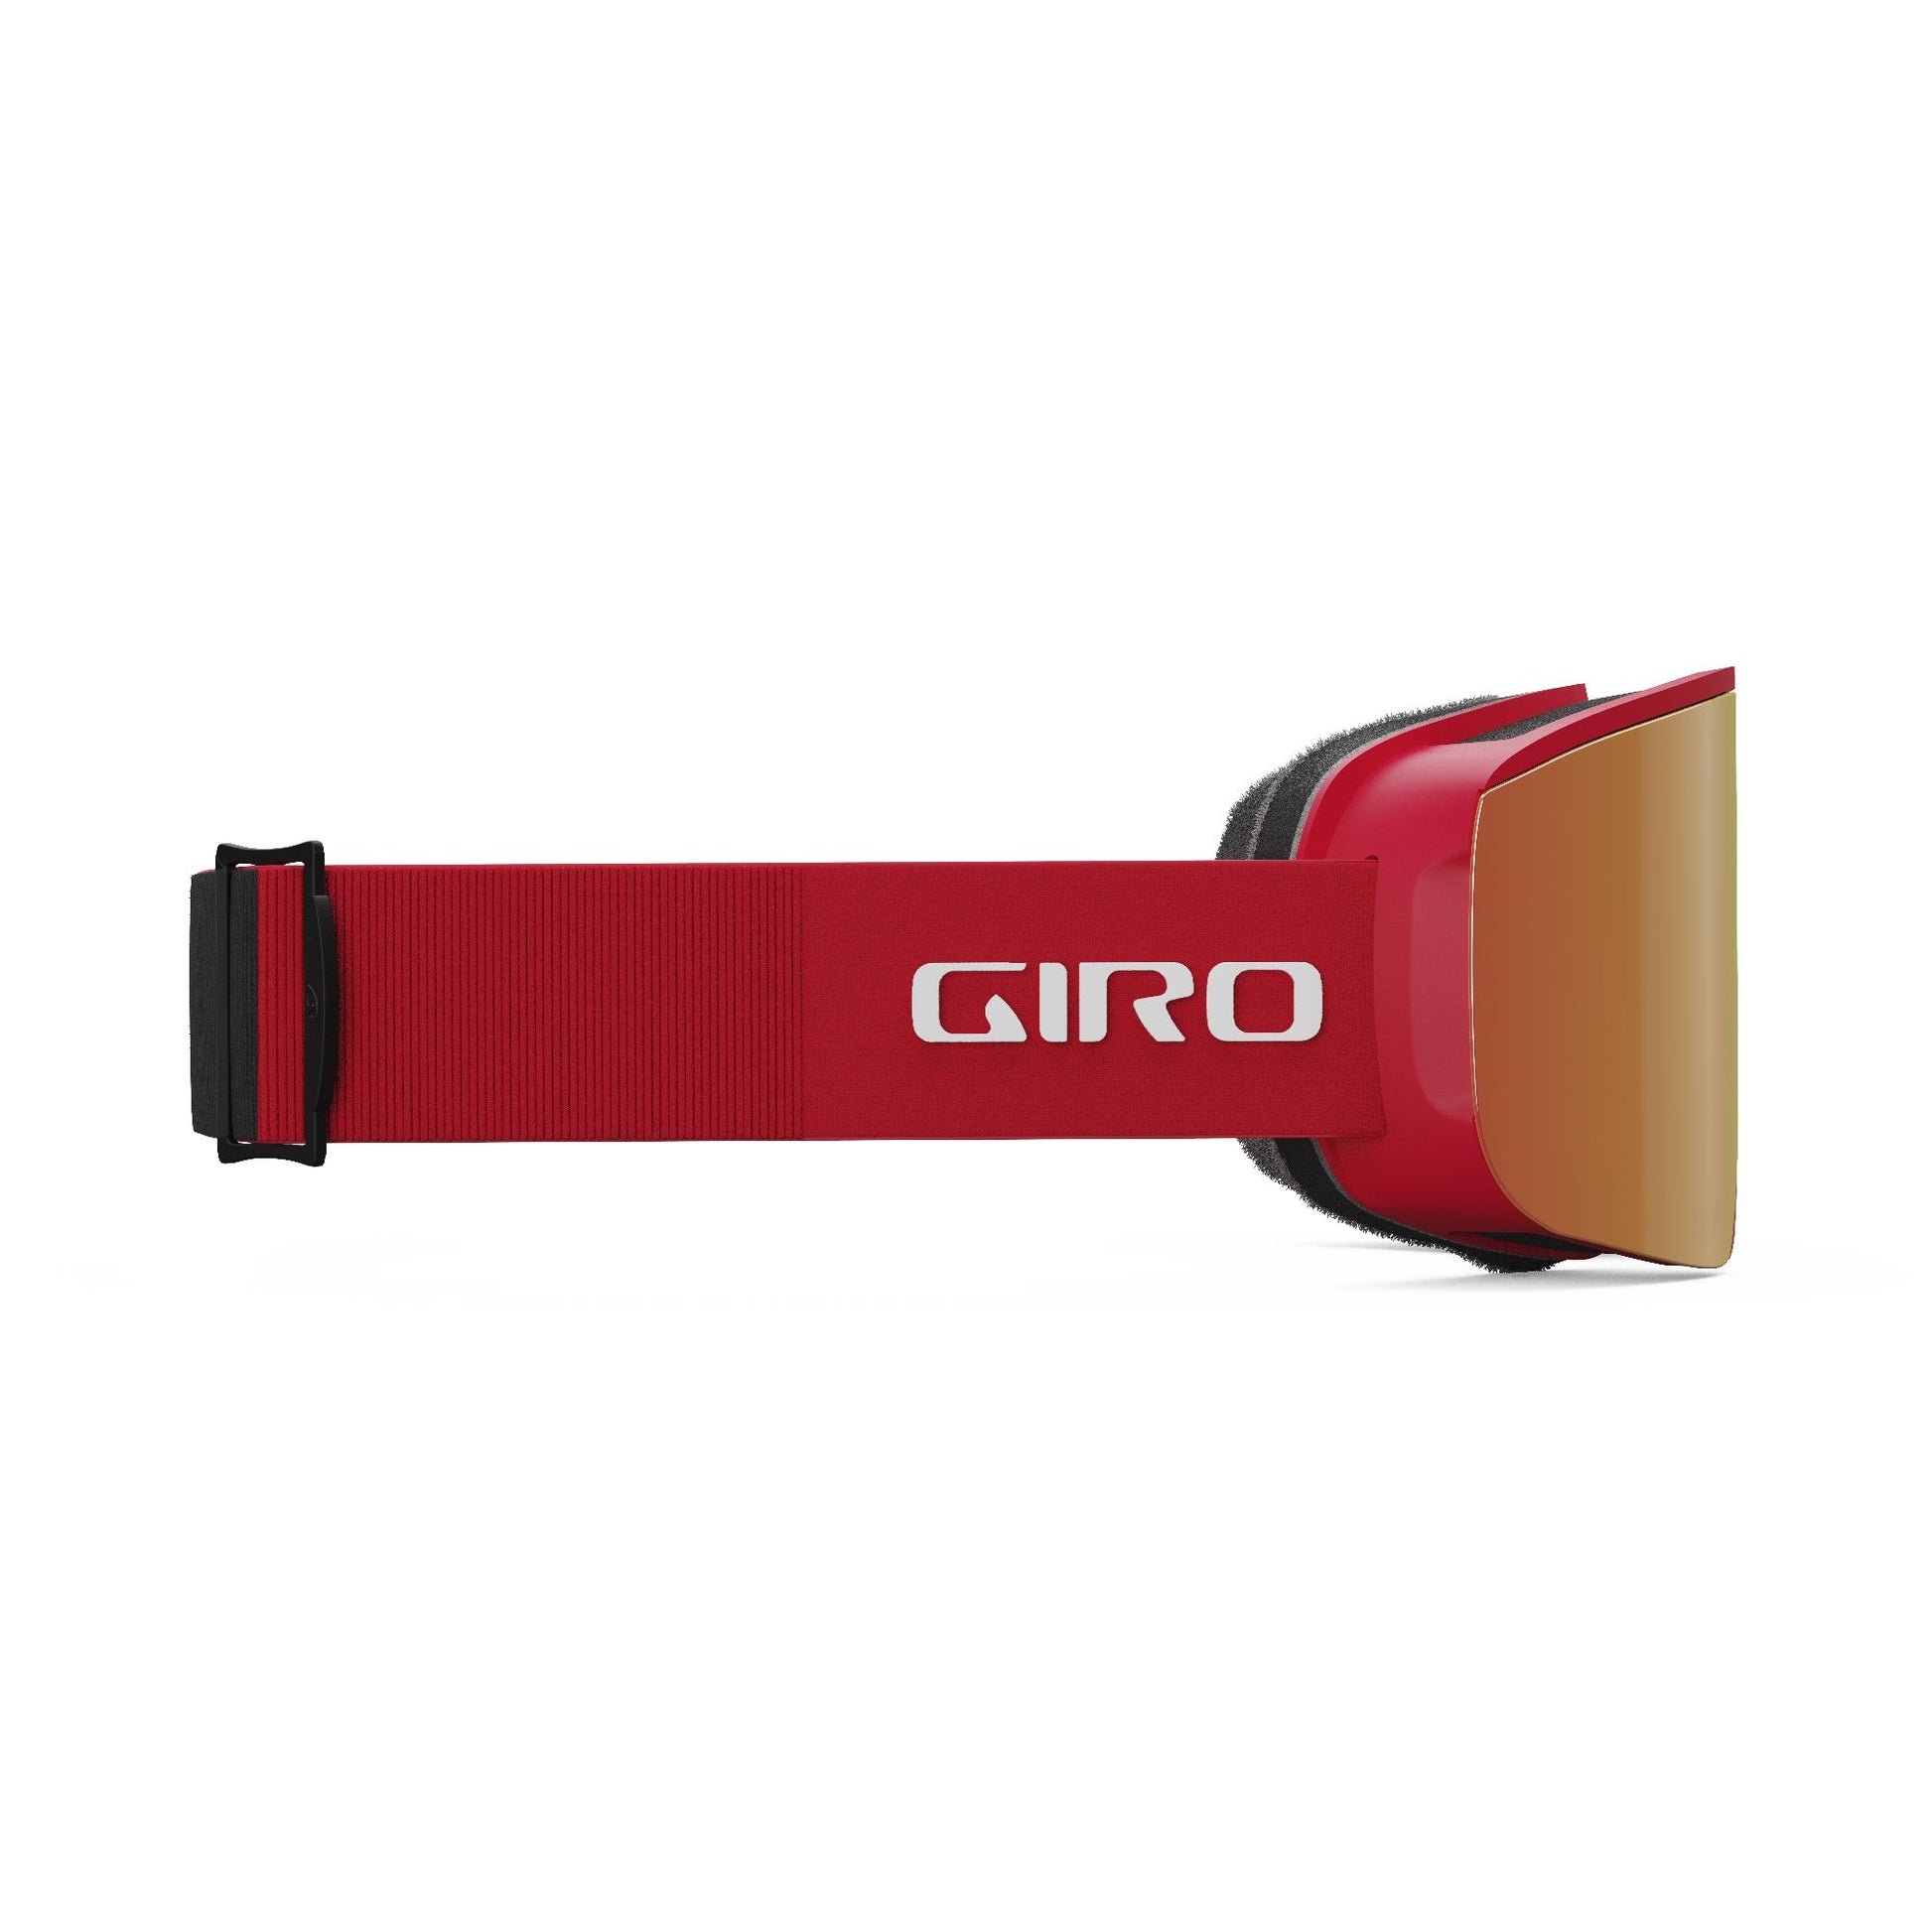 Giro Axis Snow Goggles Red & Black Thirds Vivid Ember Snow Goggles